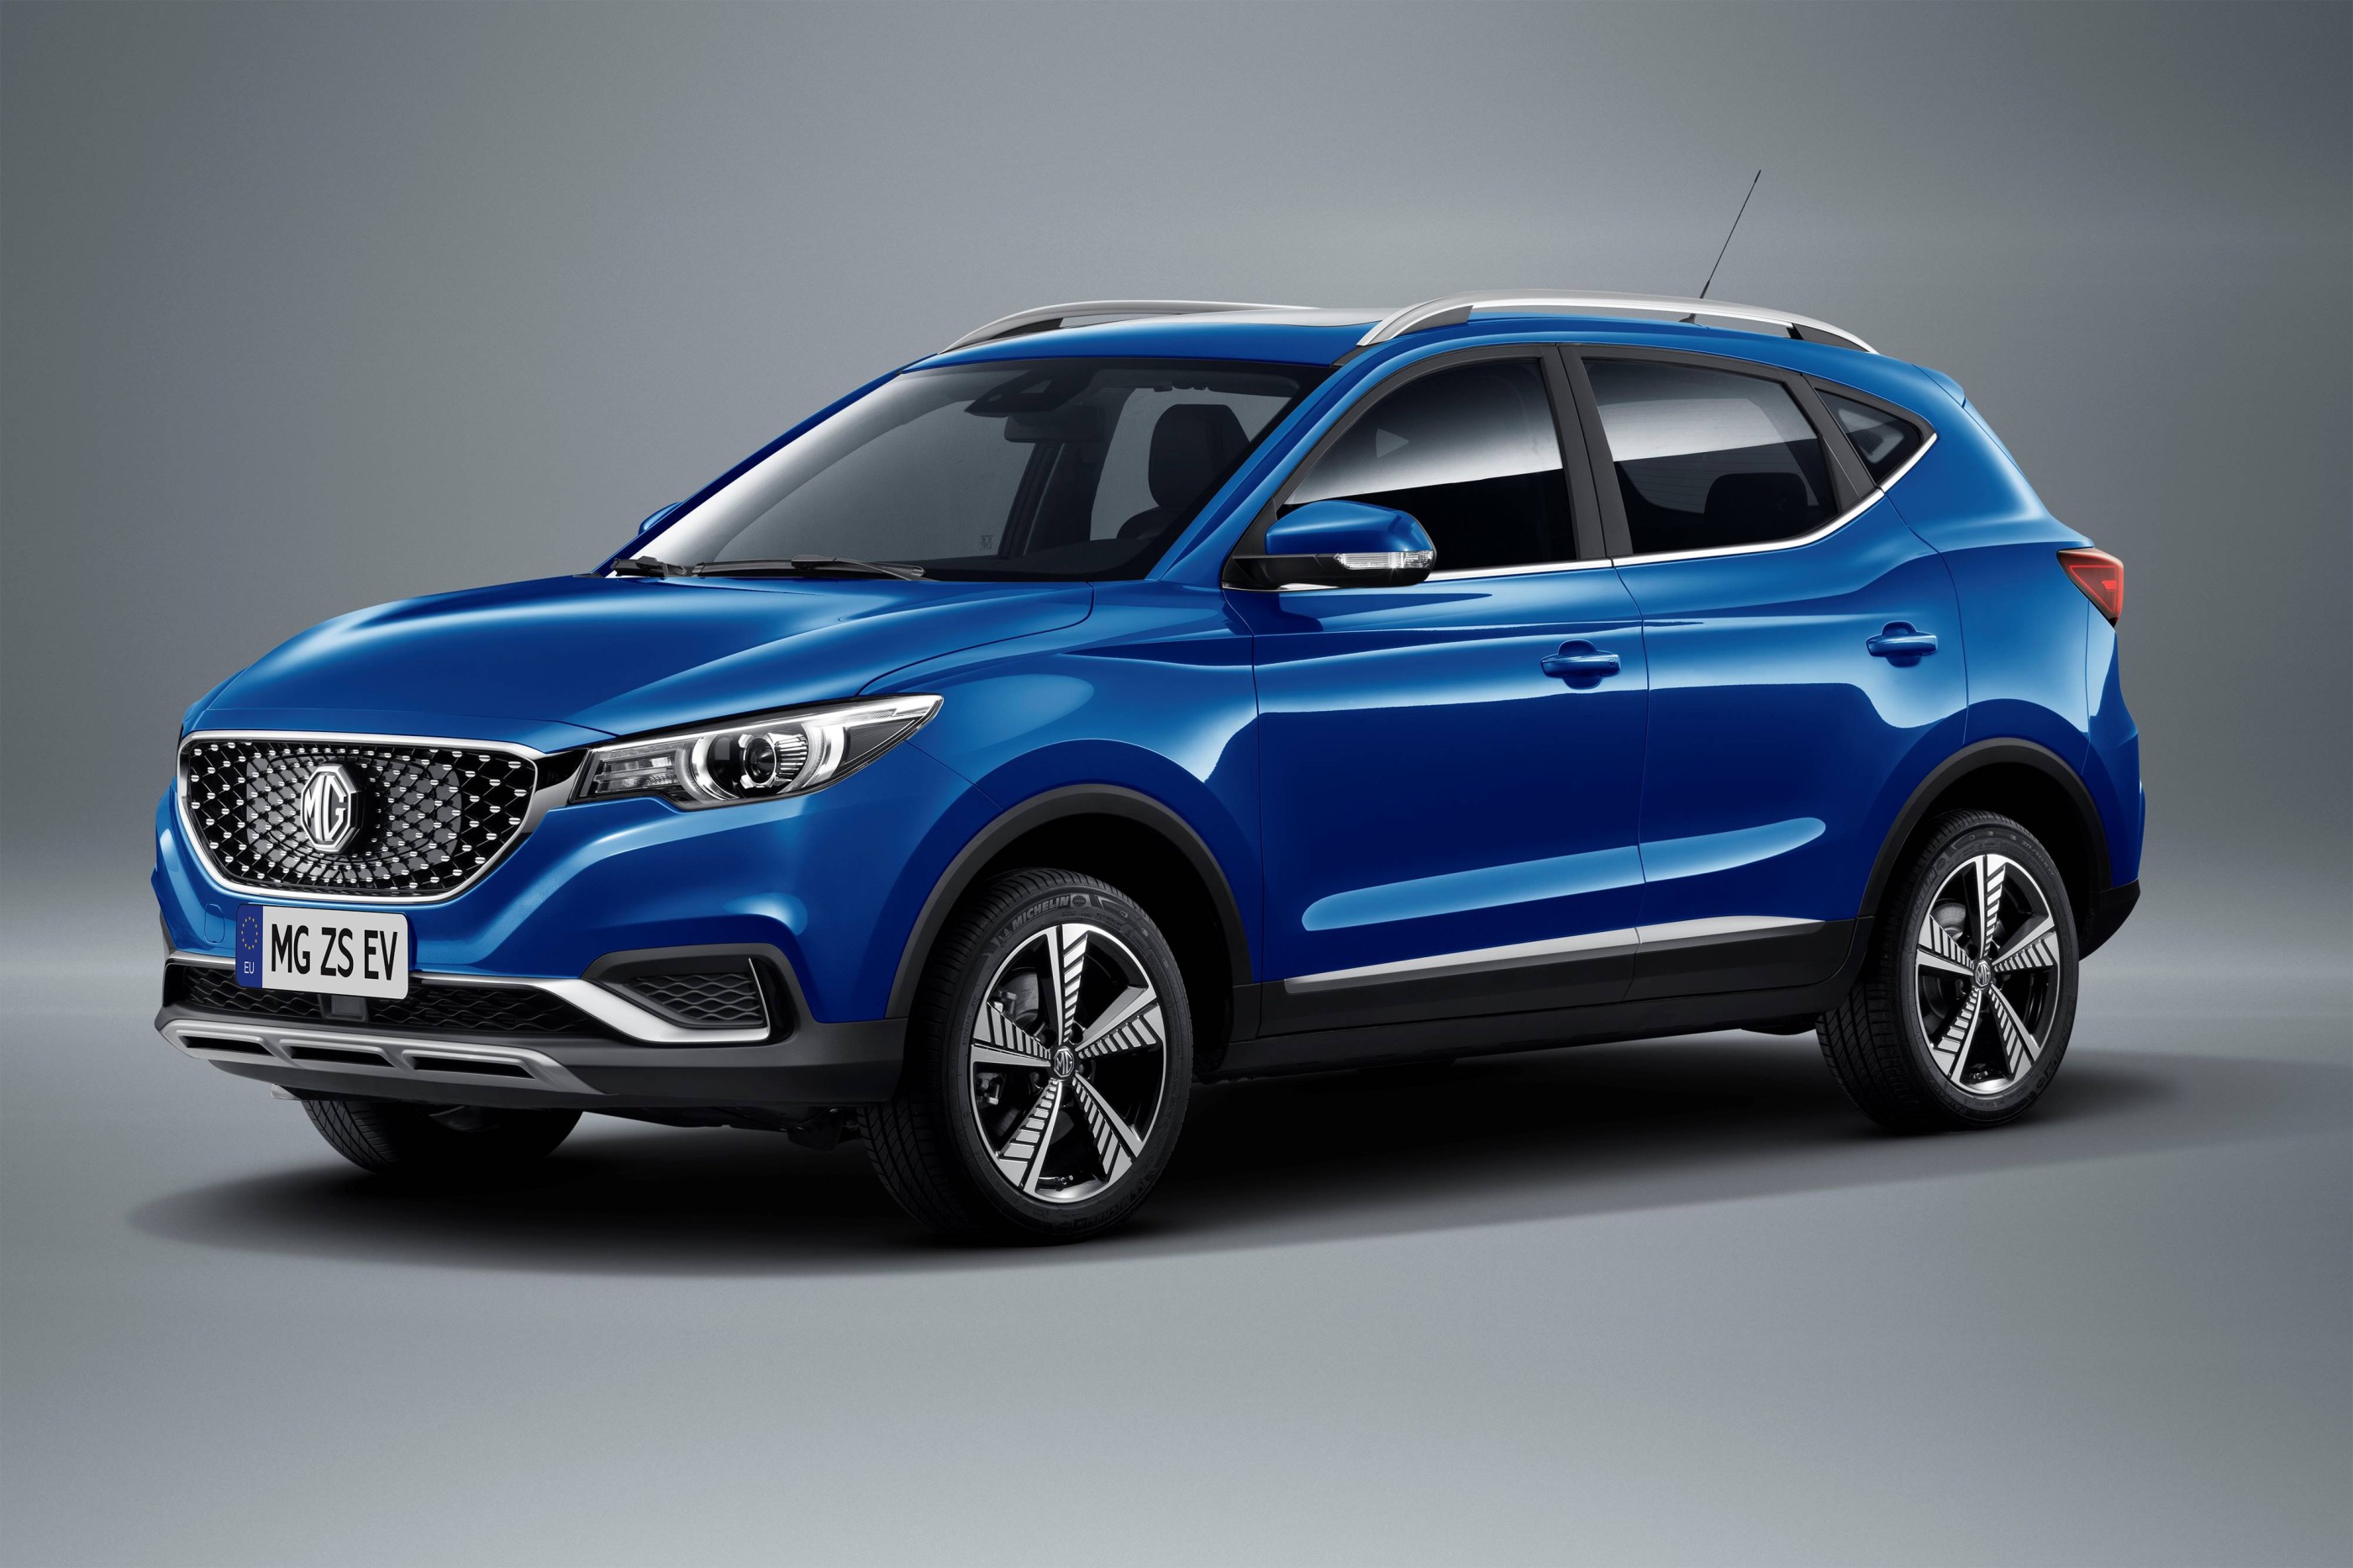 MG Motor’s First Ever AllElectric SUV, The MG ZS EV Is Now Available